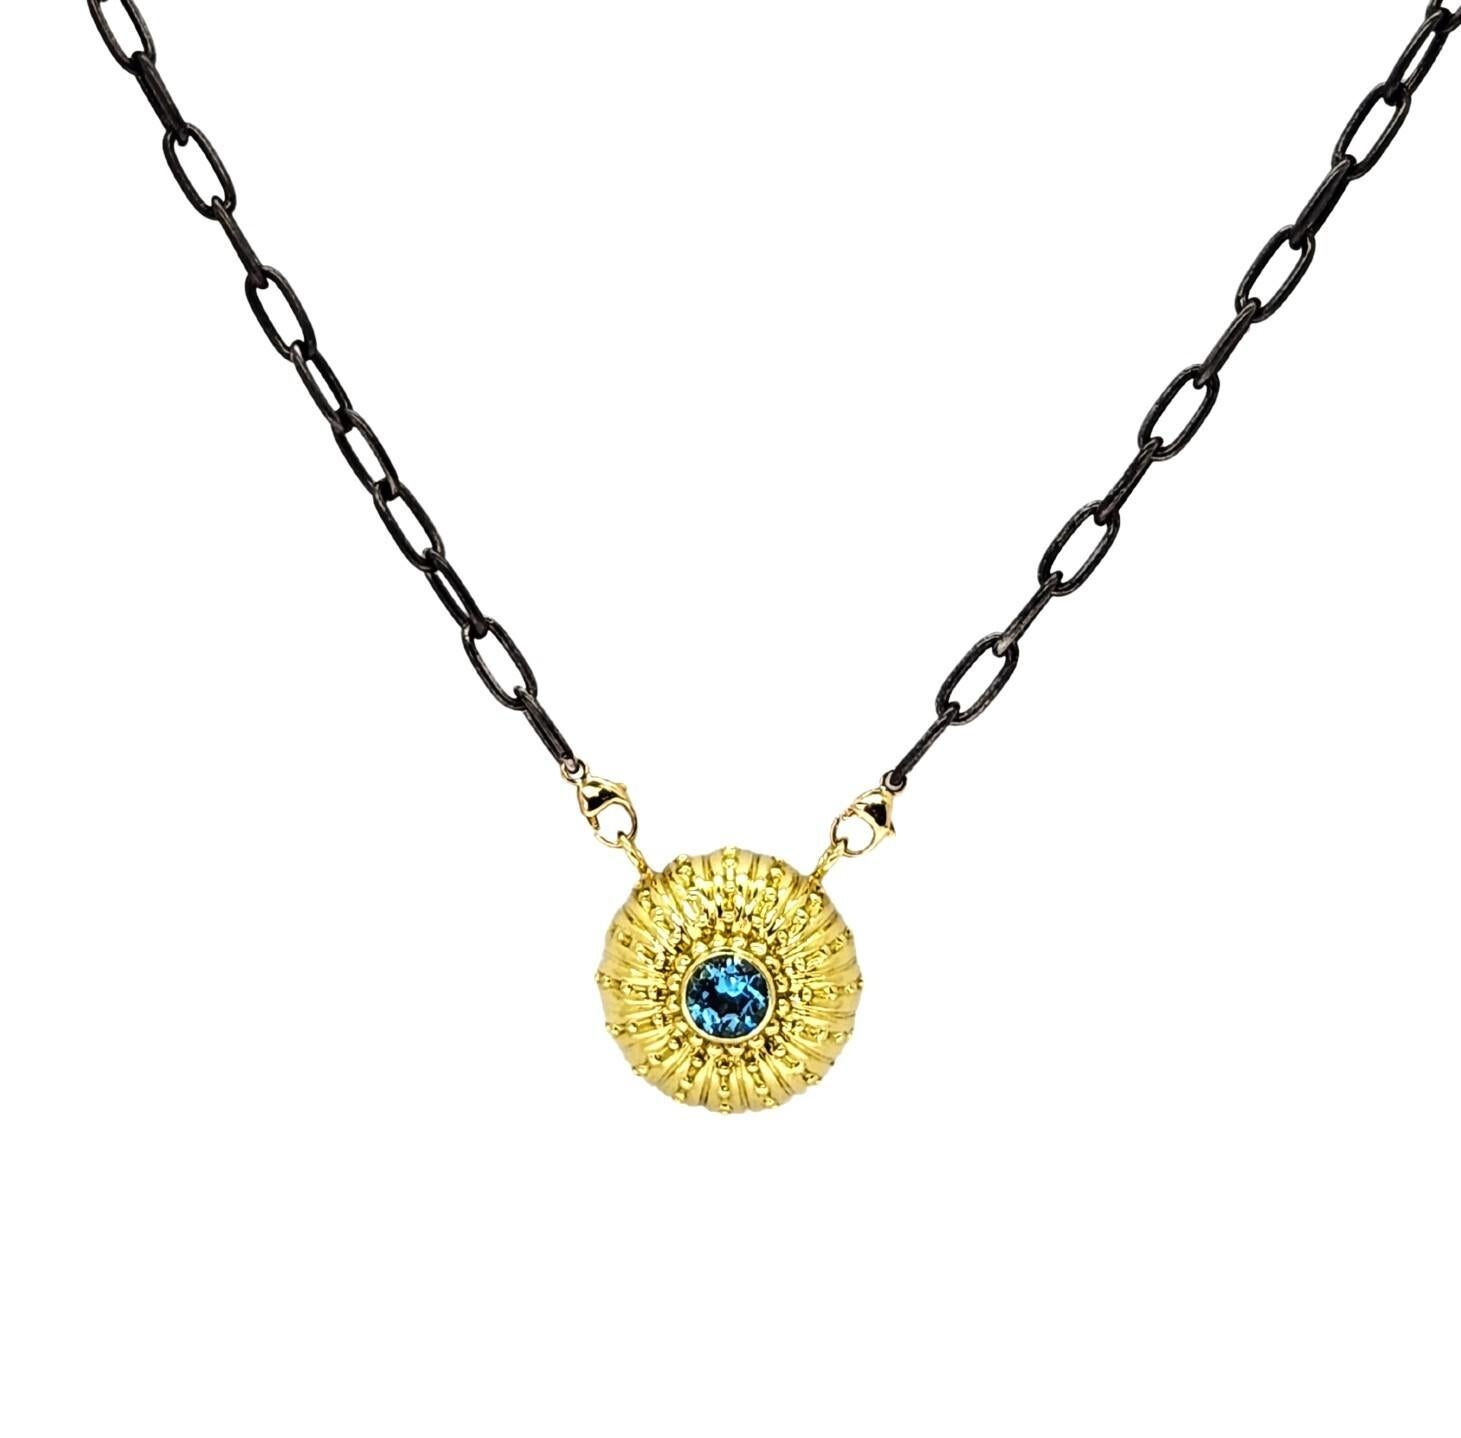 Textured Sea Urchin Necklace with Ocean Blue Topaz Center and 18K Gold Necklace For Sale